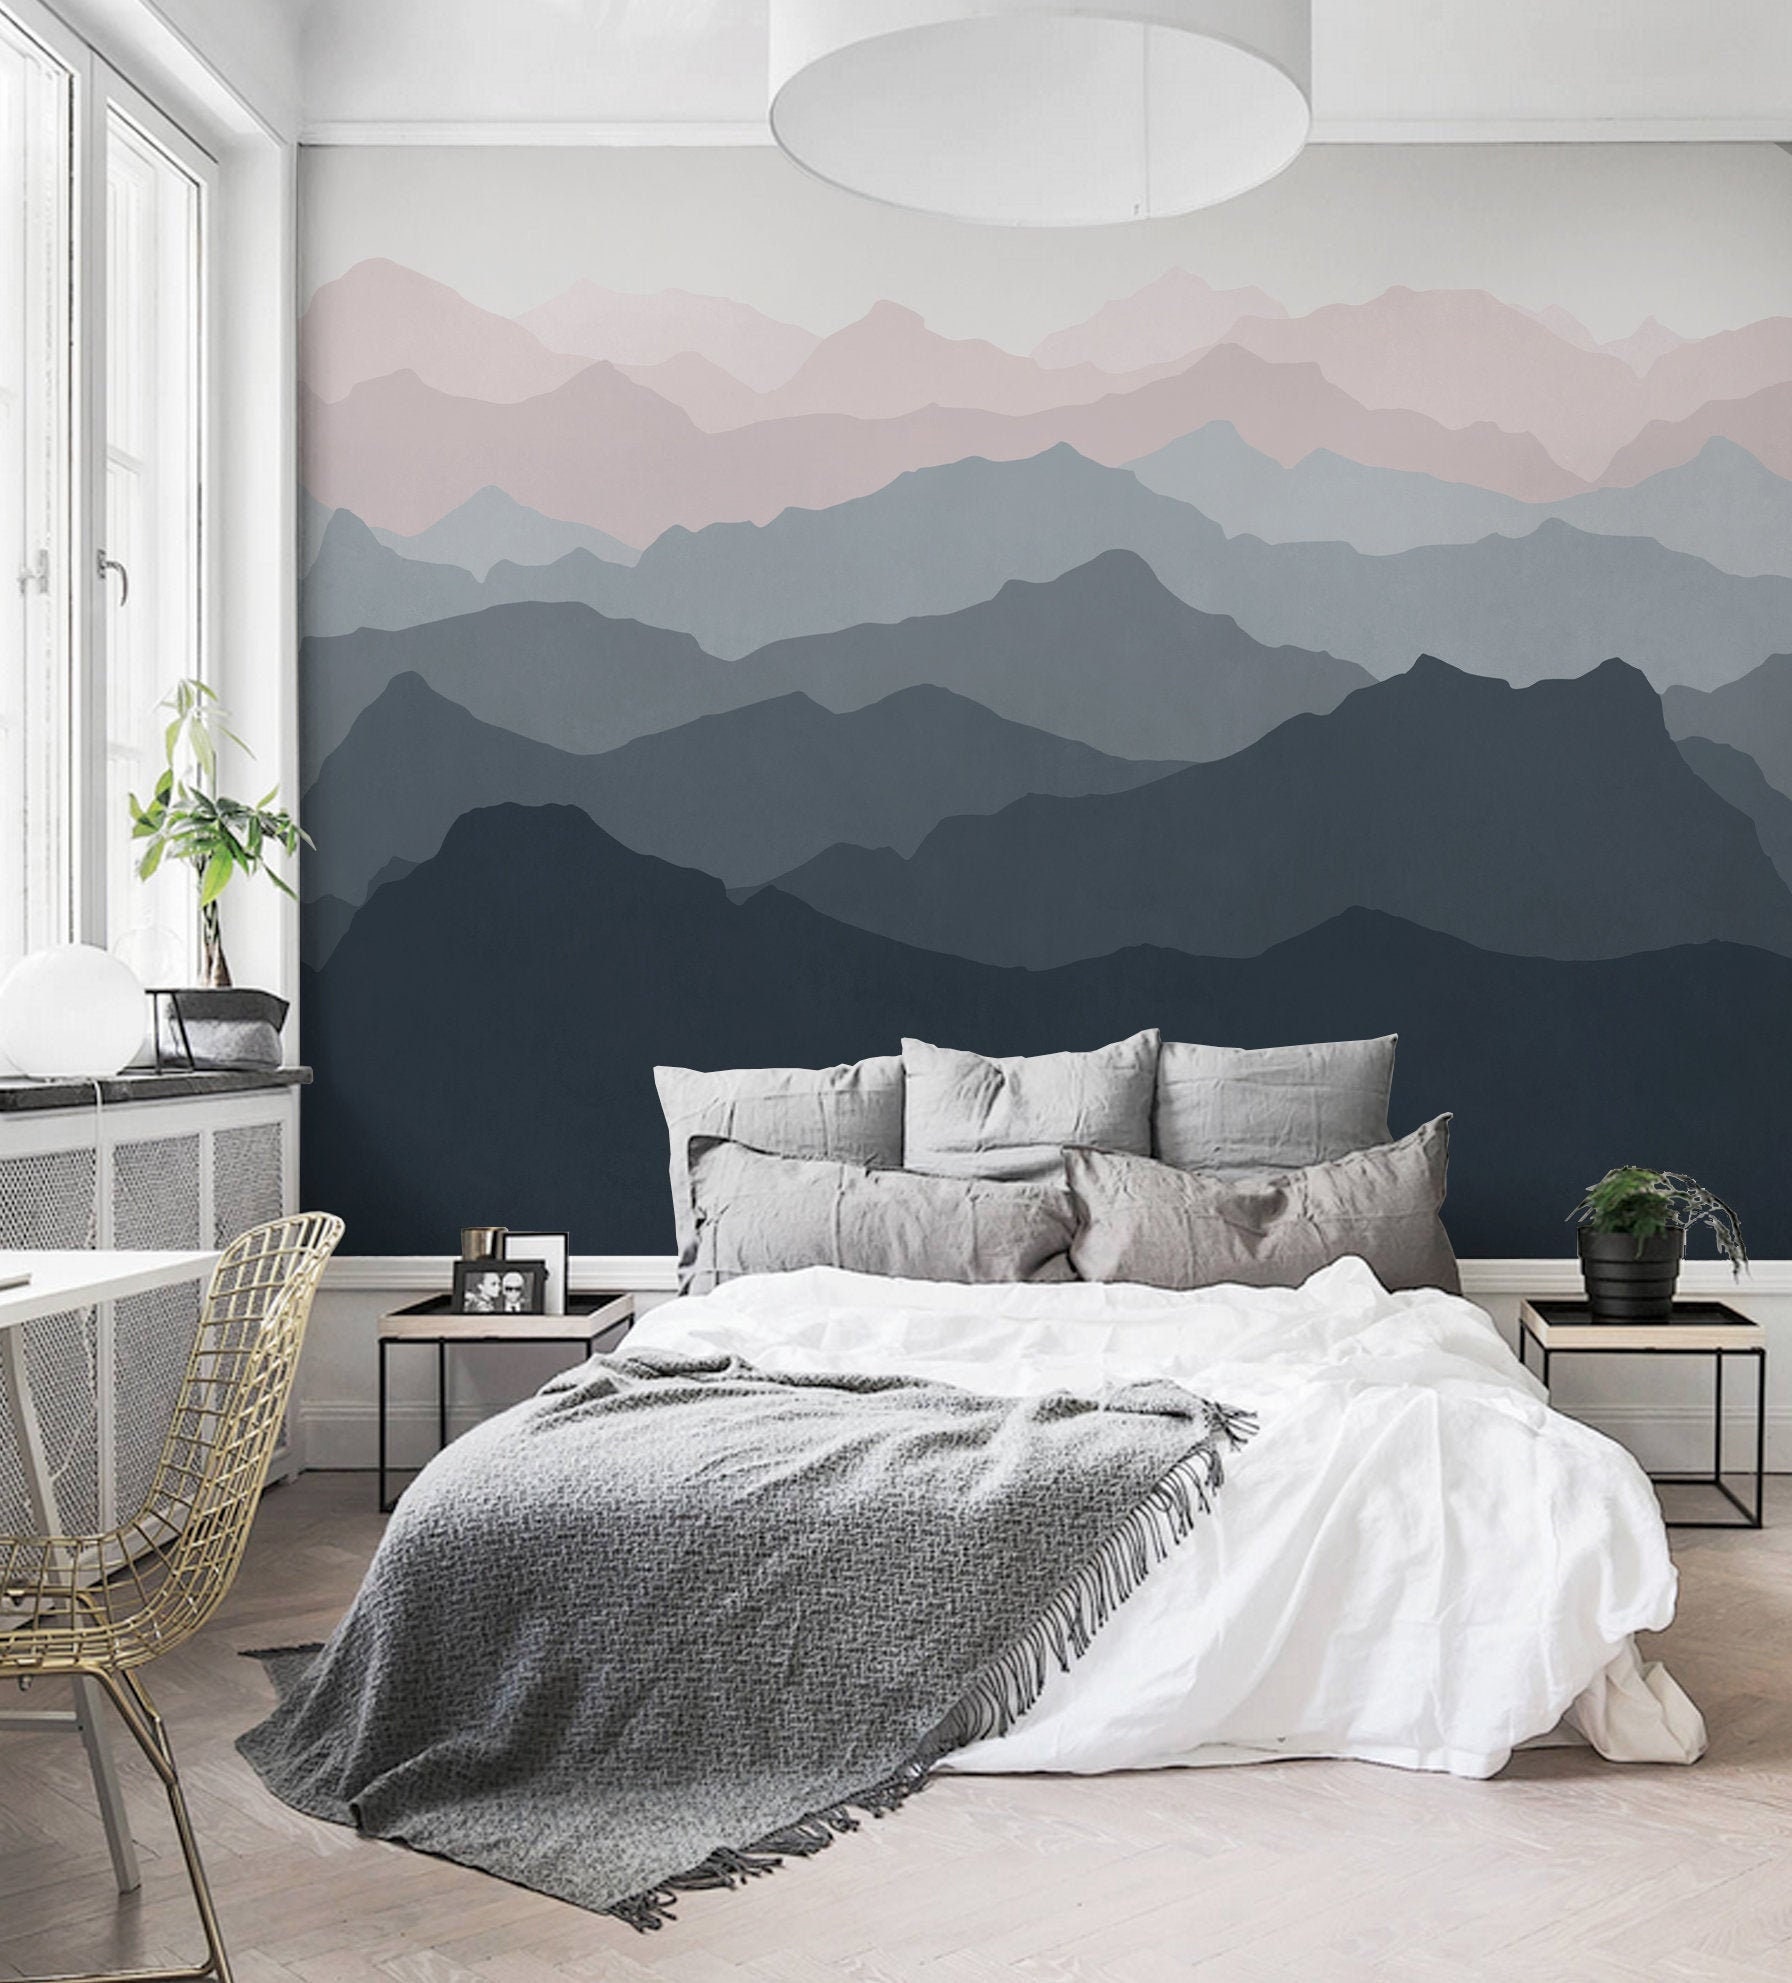 Colorful Foggy Mountain Forest View Wall Mural  Peel and Stick Wallpaper  6159  eBay